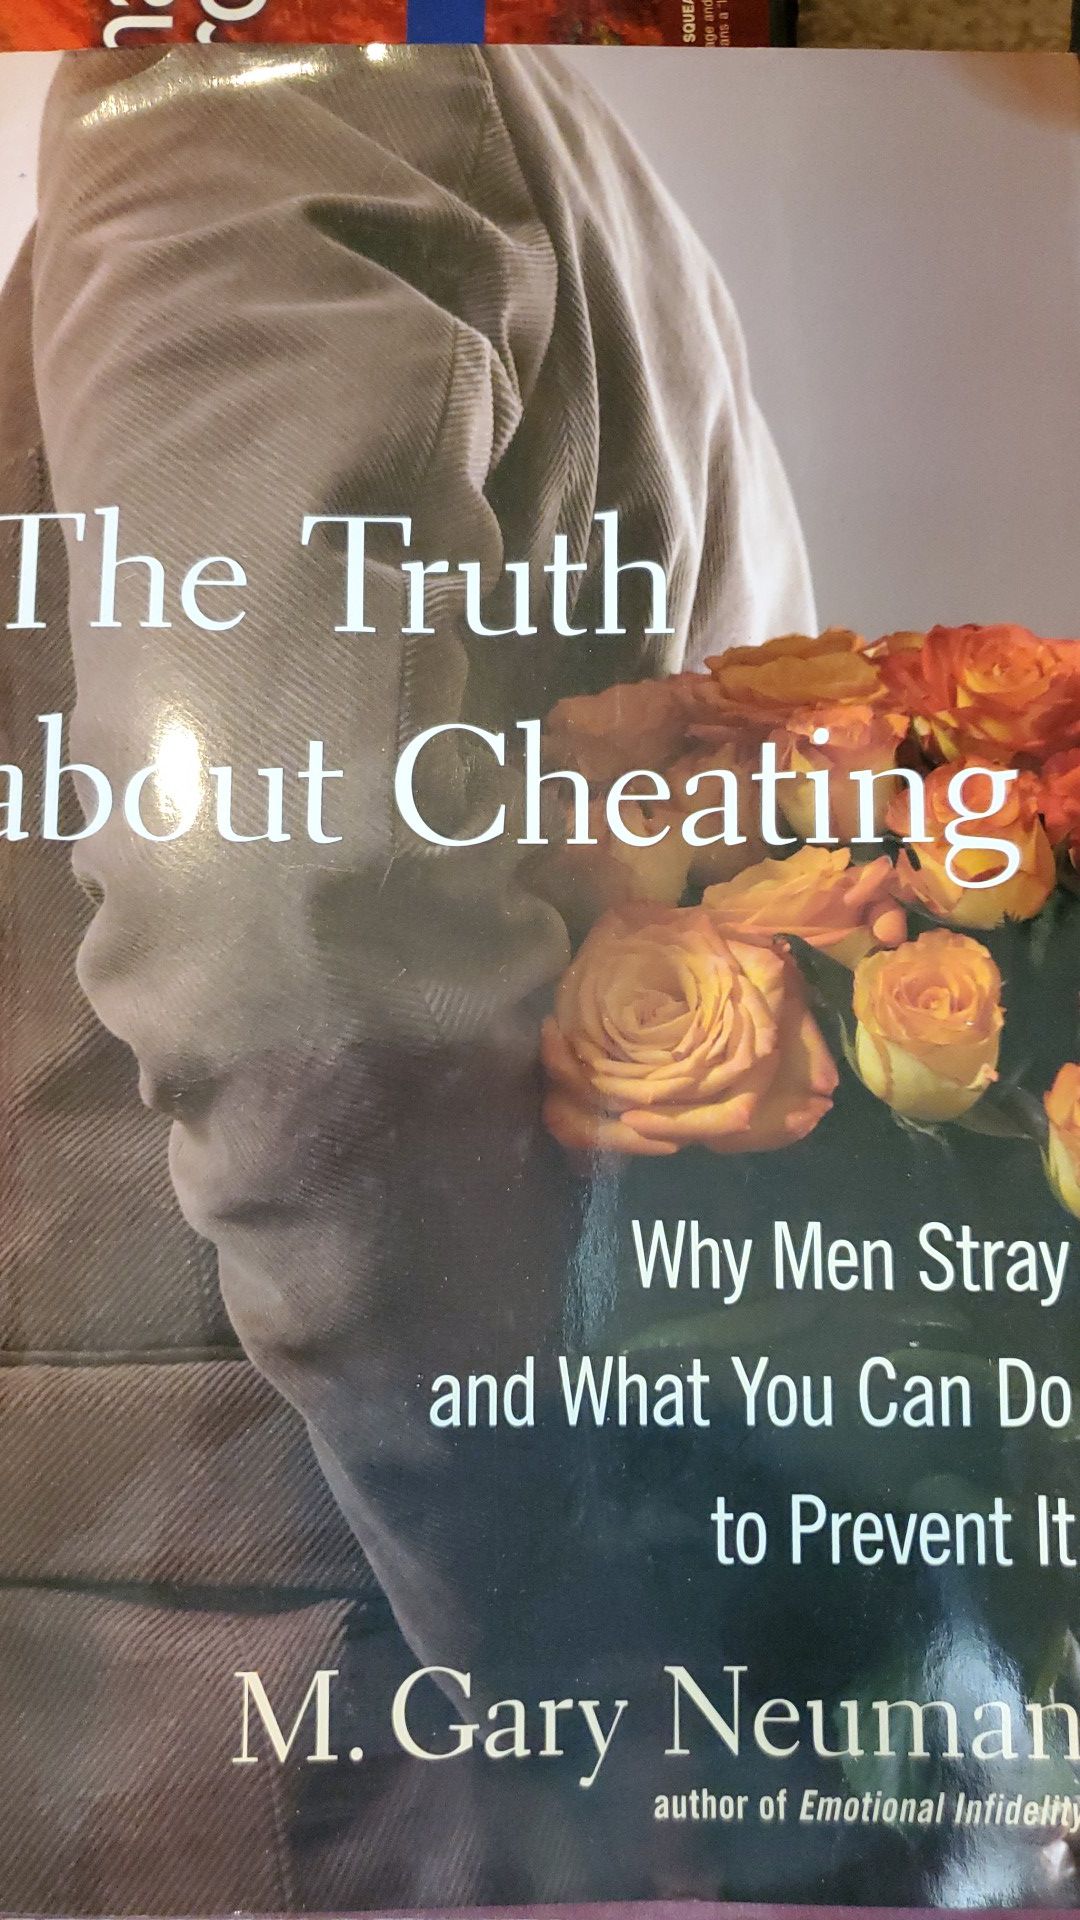 The Truth about Cheating by M. Gary Neuman